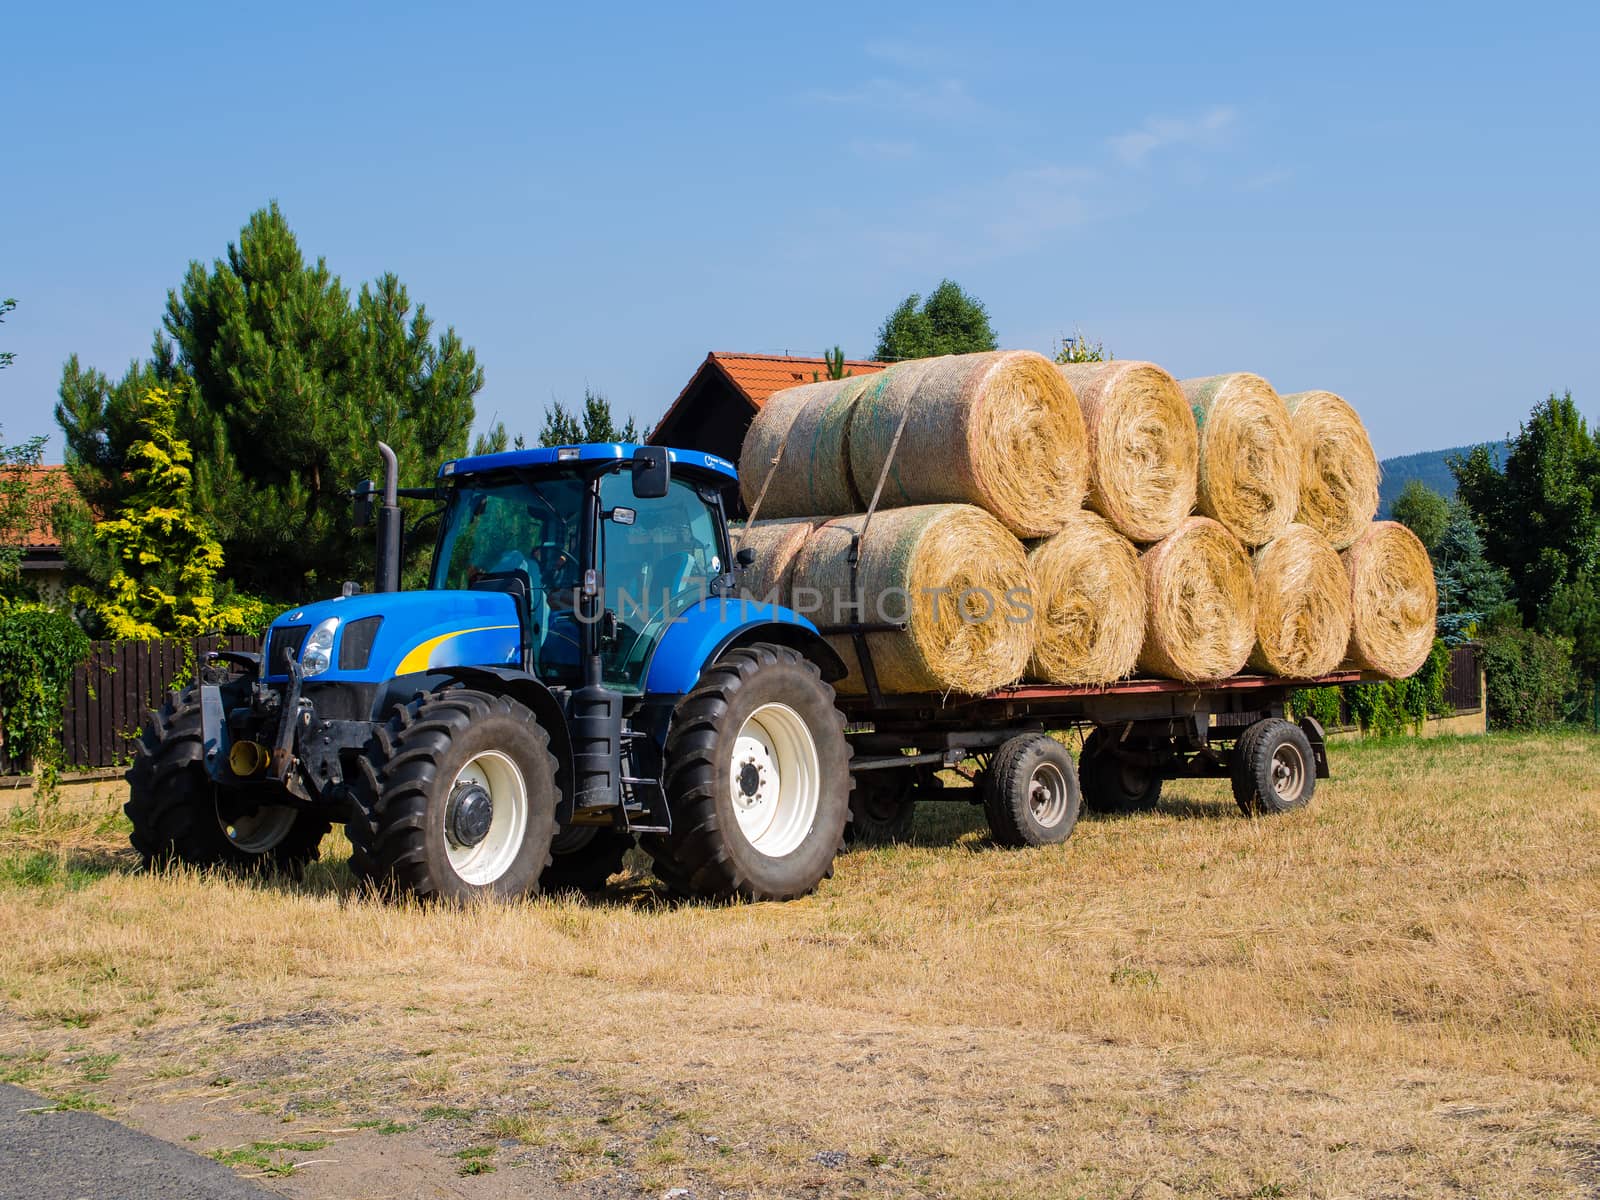 Tractor and wagon loaded with hay stacks during harvest time by weruskak